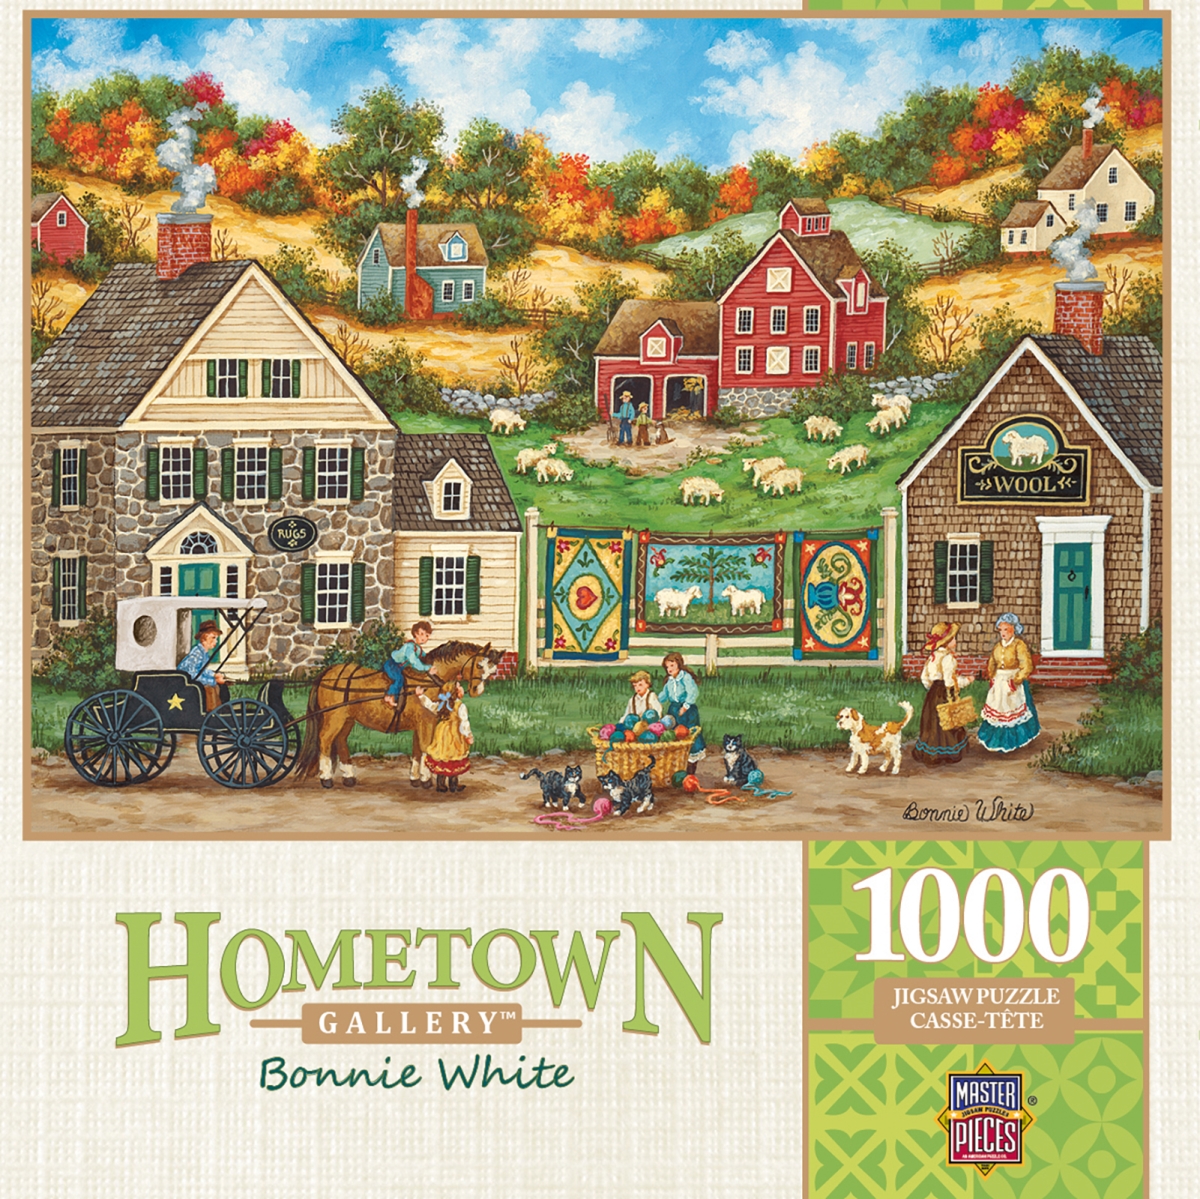 71825 19.25 X 26.75 In. Bonnie White Hometown Gallery Great Balls Of Yarn Jigsaw Puzzle - 1000 Piece